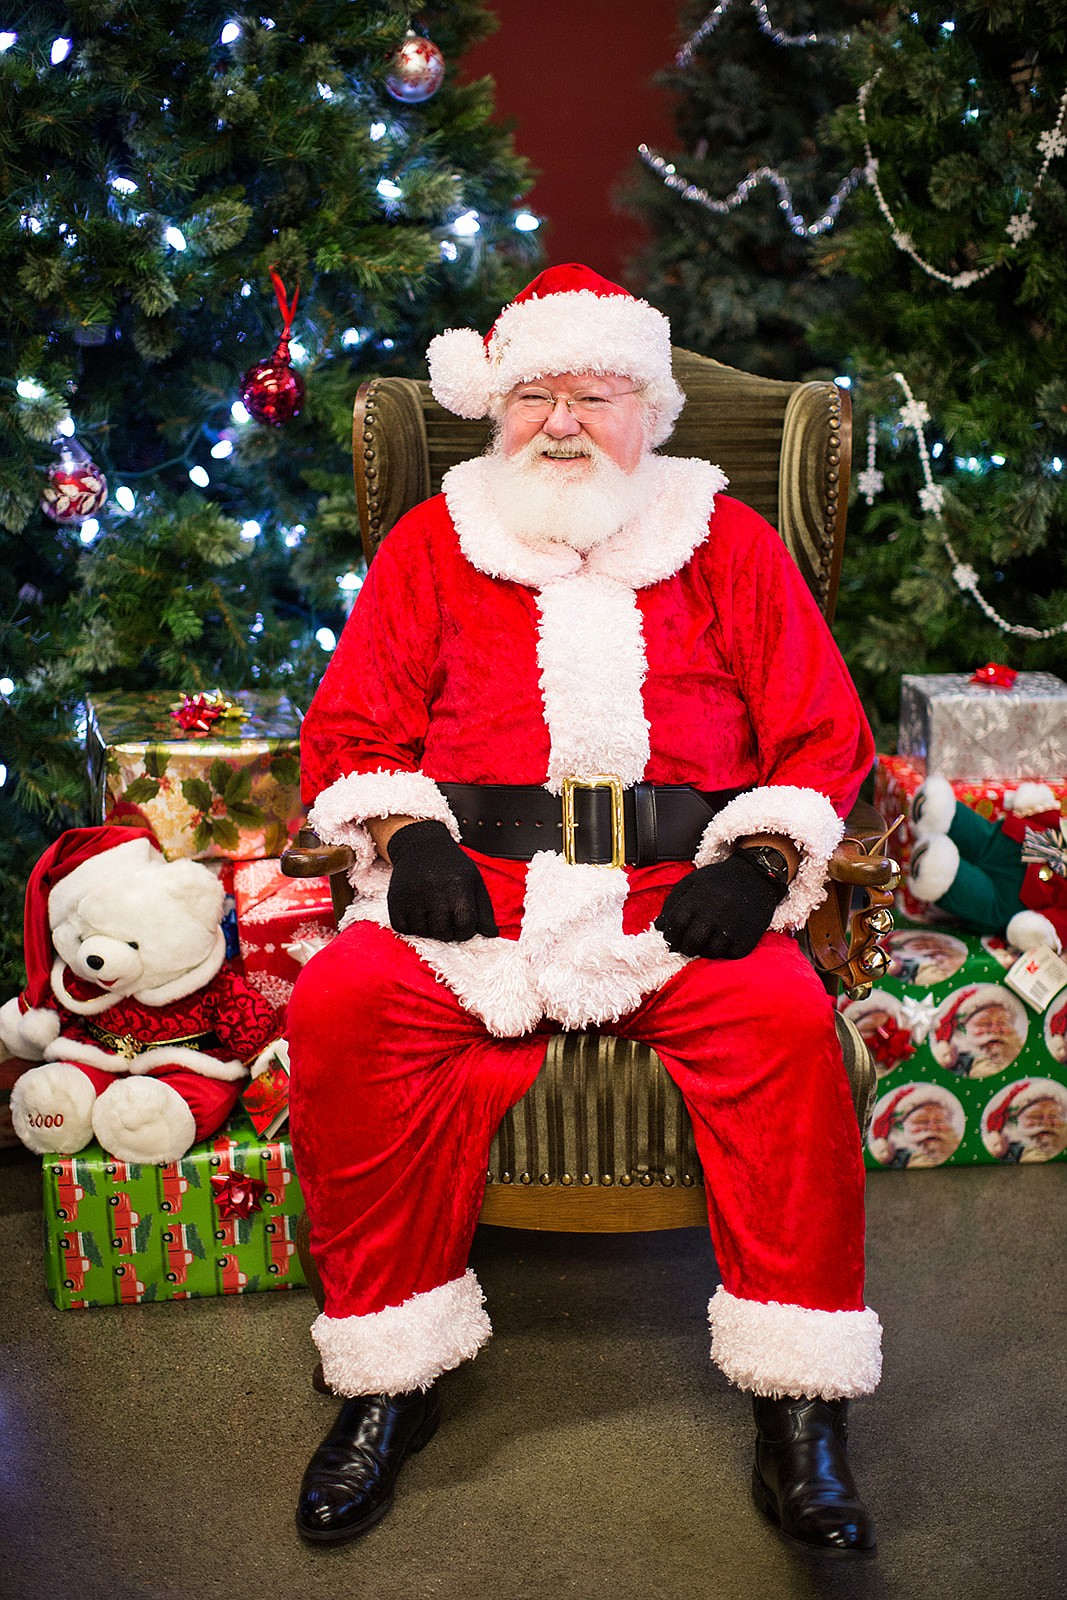 Get free photos with Santa Dec. 10–11 and 17–18 at Bellewood Farms. The big guy in red will also be in attendance at a Holiday Fair taking place Dec. 10 at the Port of Anacortes Transit Shed, and Sunday, Dec. 11 at the Homegrown Holiday Market at the Alger Community Hall.